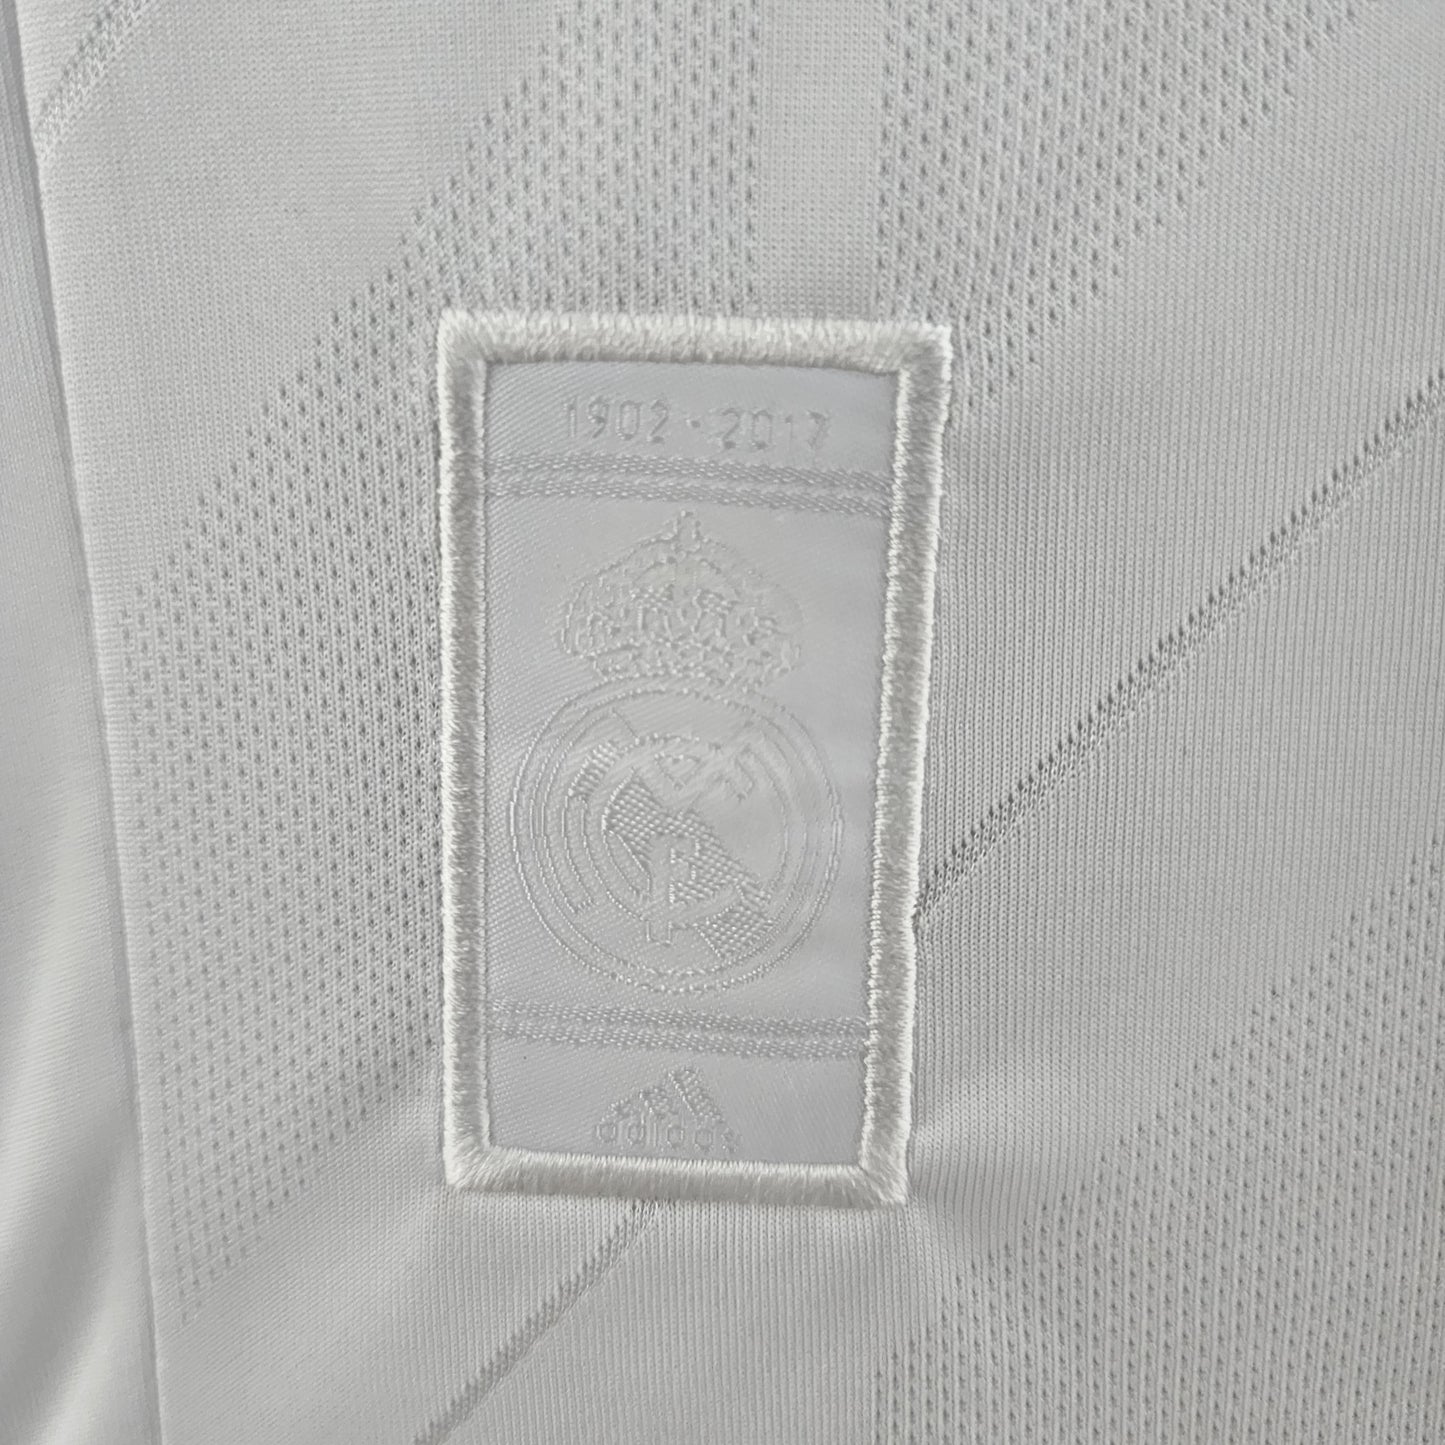 REAL MADRID 2017 - 2018 HOME JERSEY